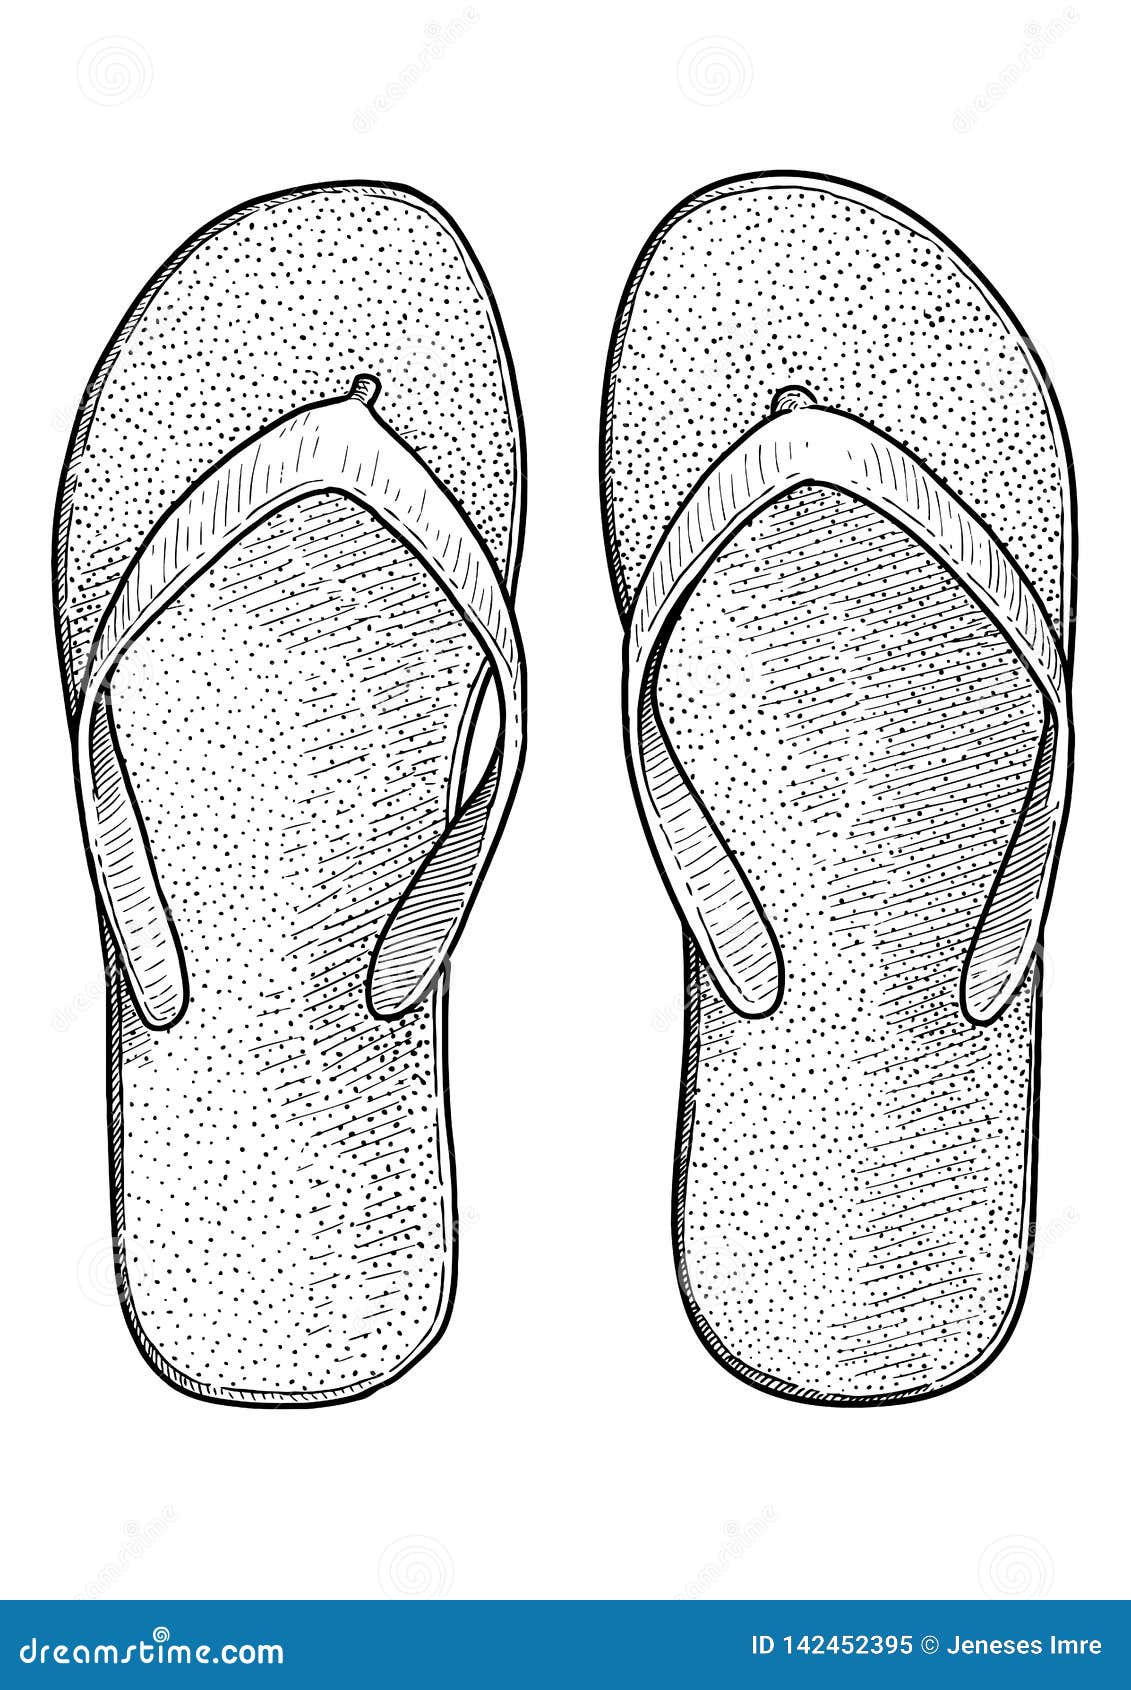 How to draw a flip flop sandal Real Easy - YouTube